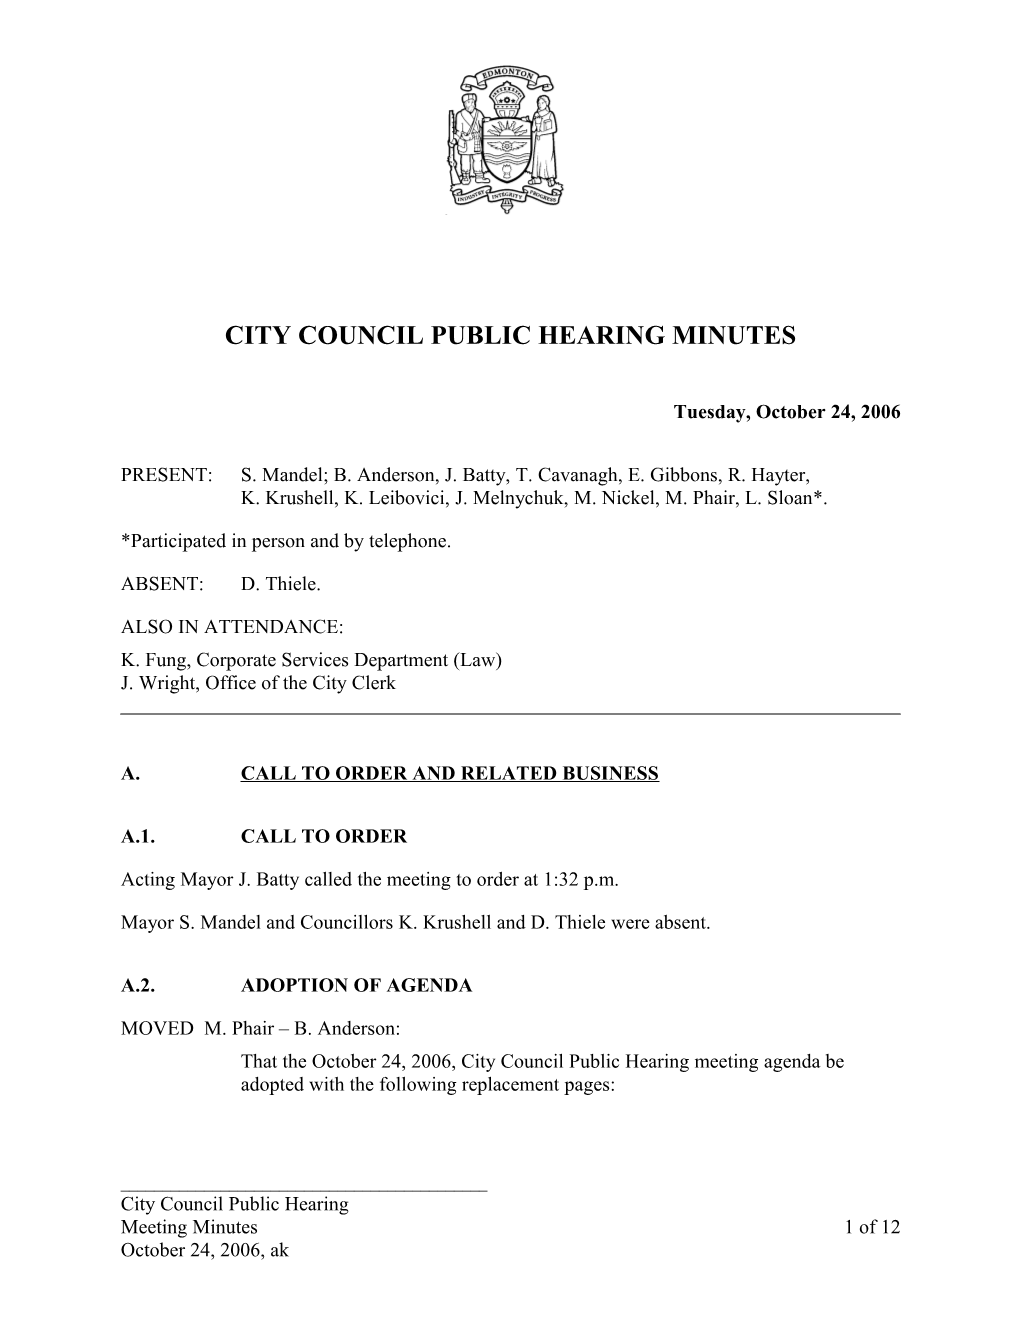 Minutes for City Council October 24, 2006 Meeting